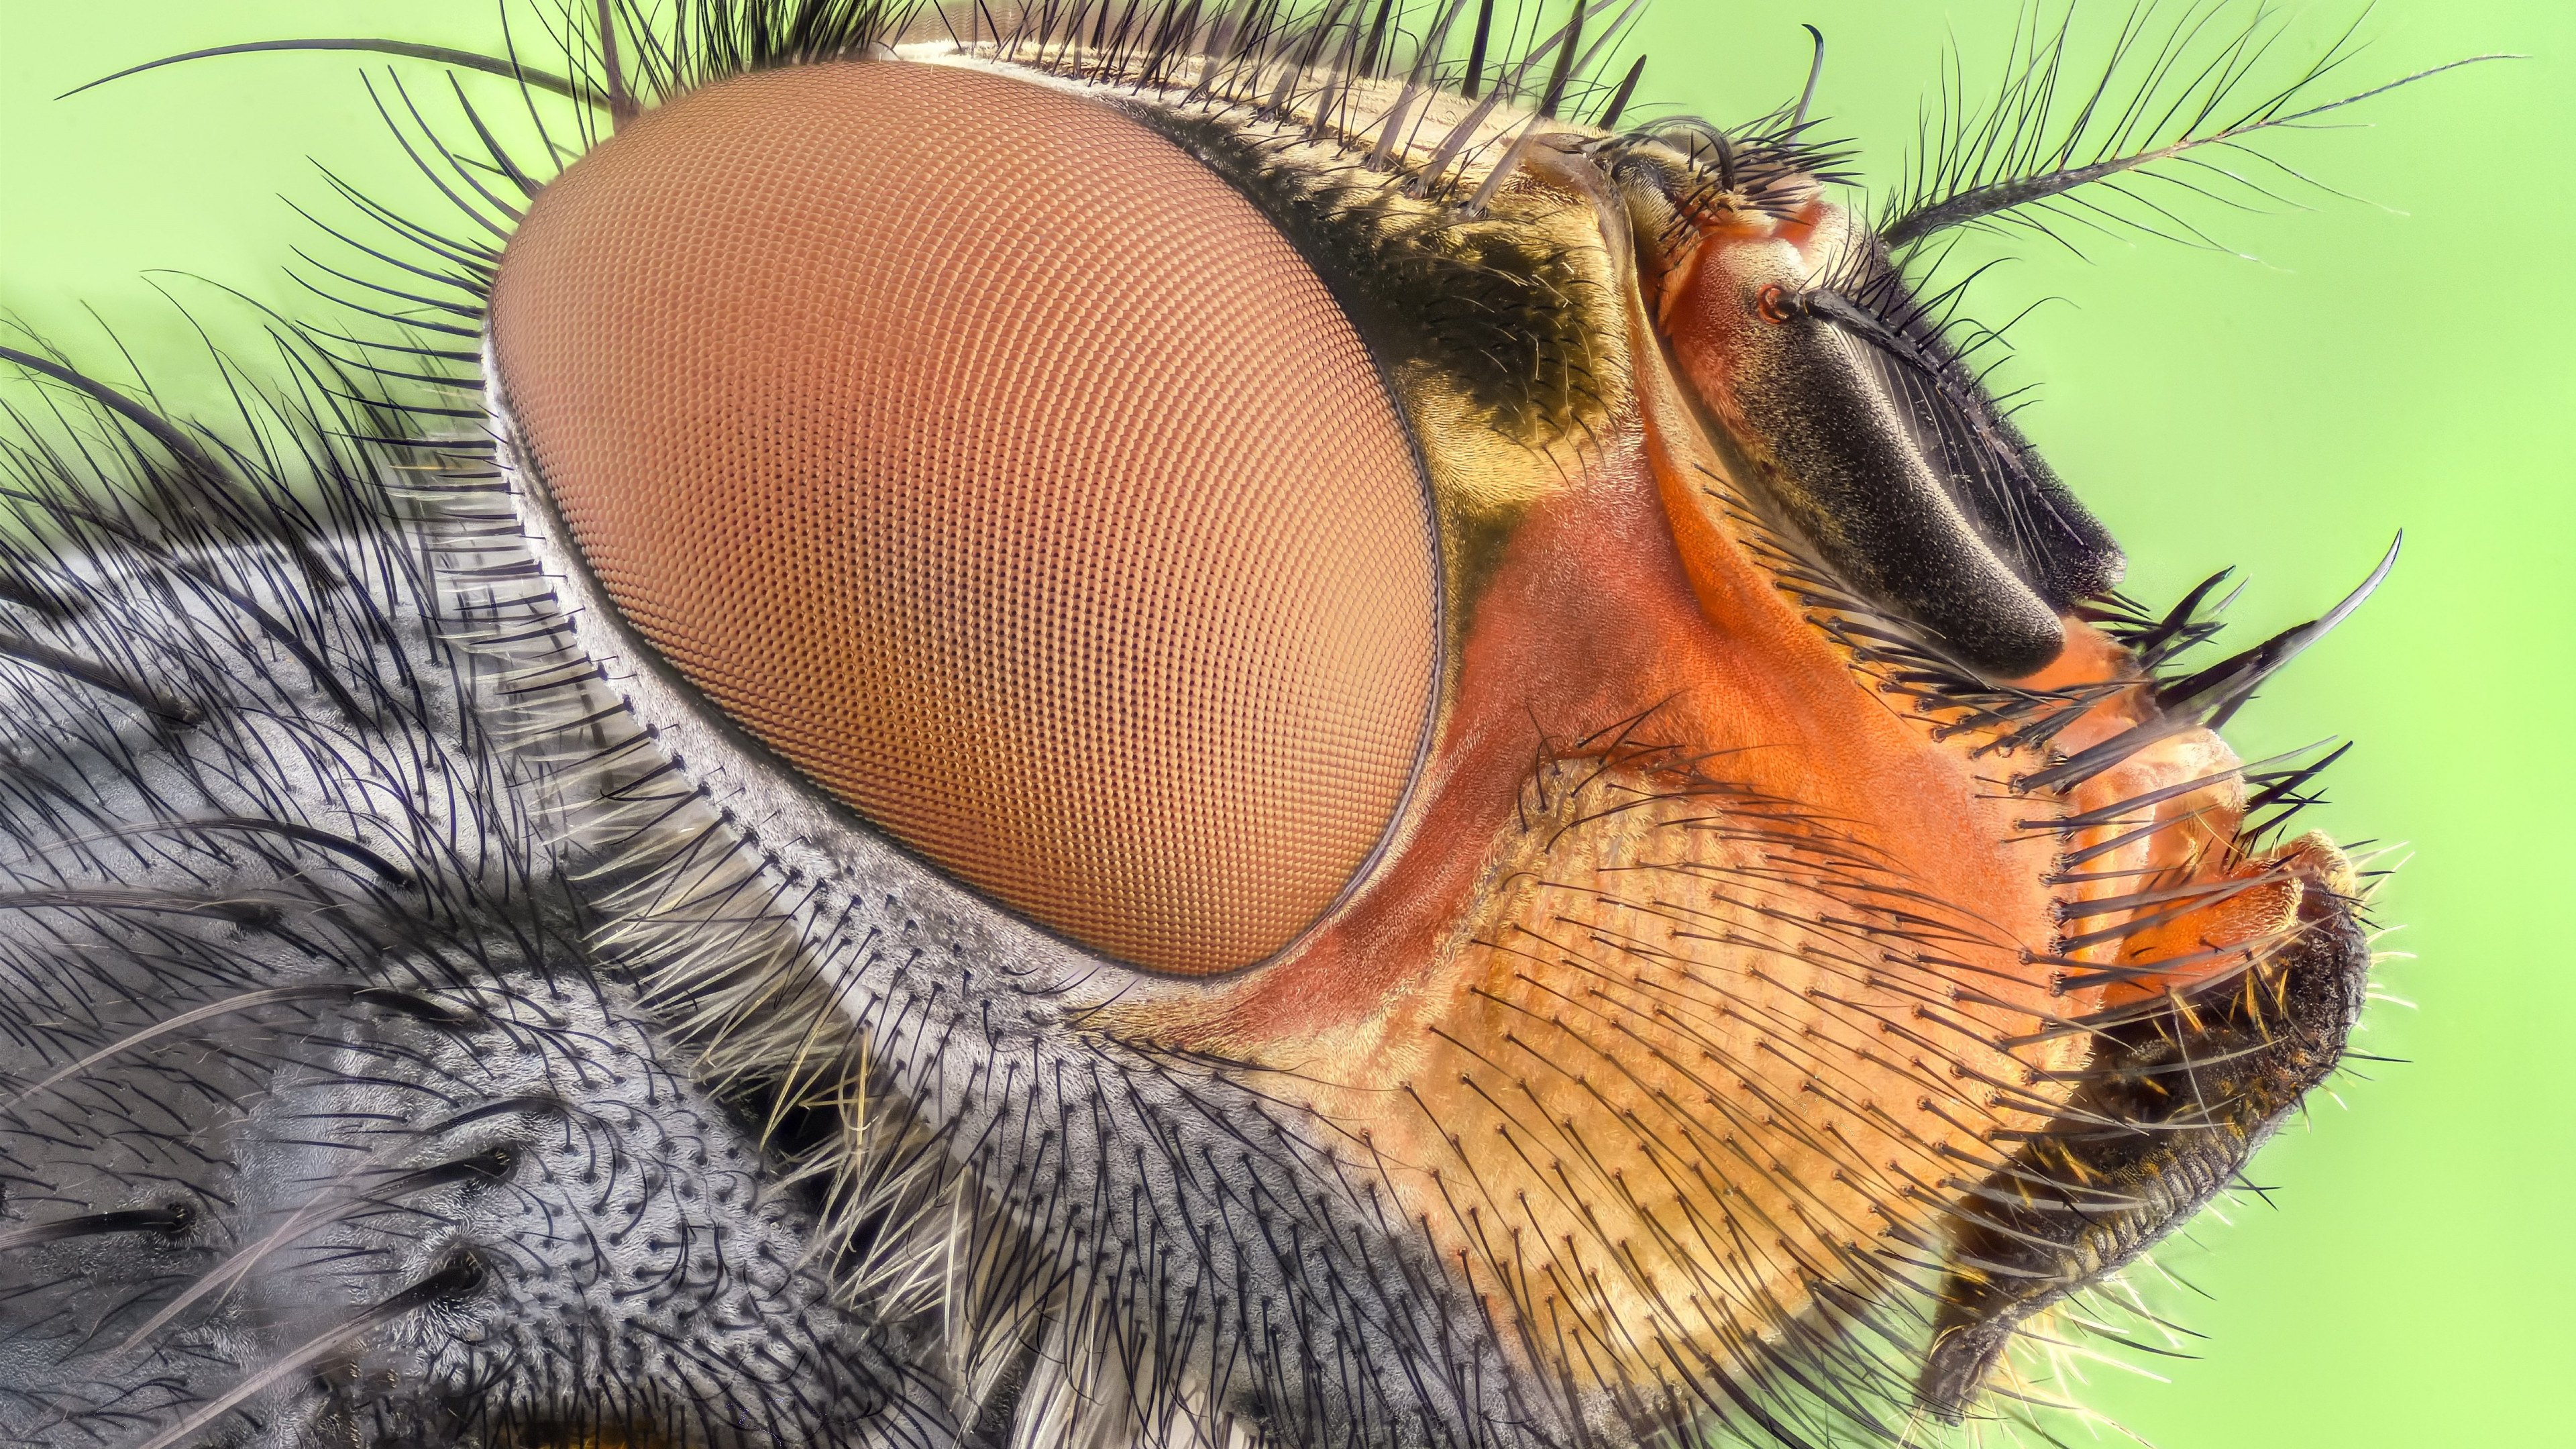 Close up insect portrait wallpaper 3840x2160